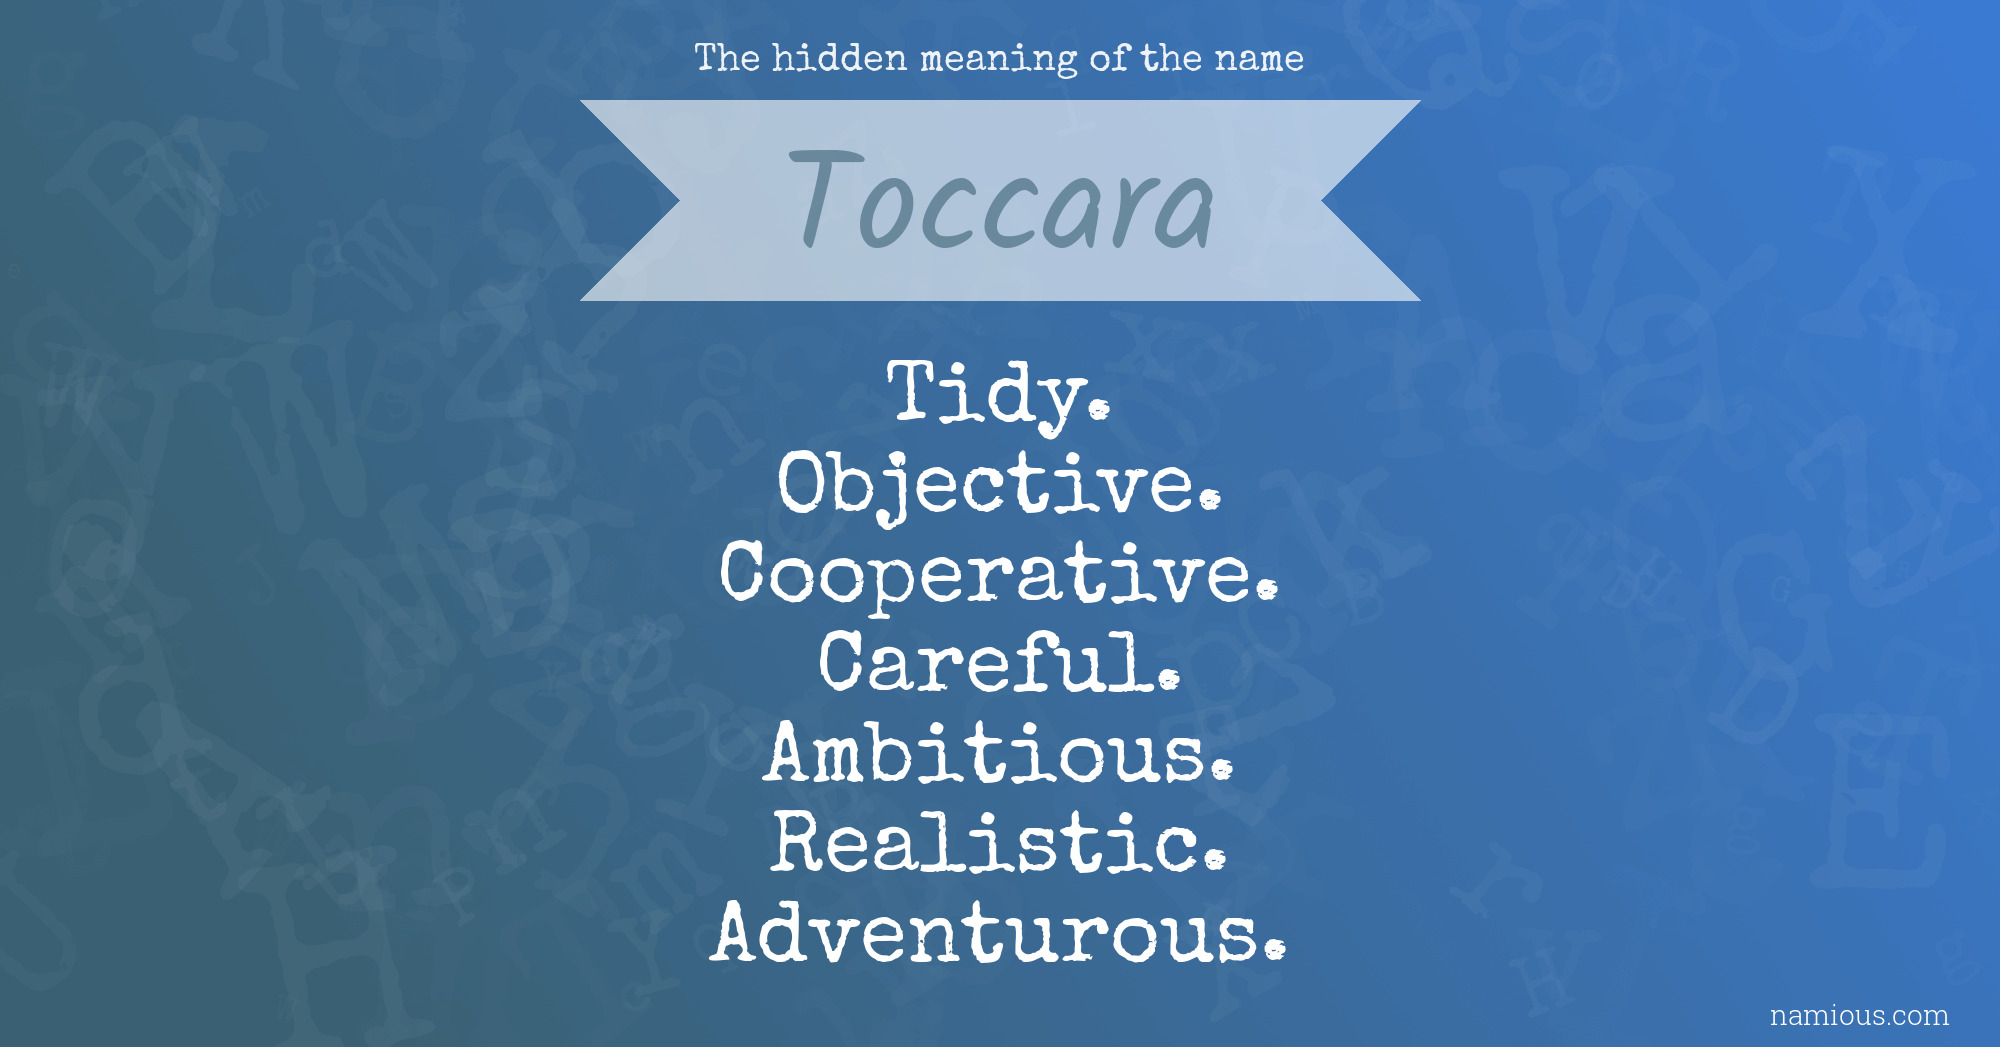 The hidden meaning of the name Toccara